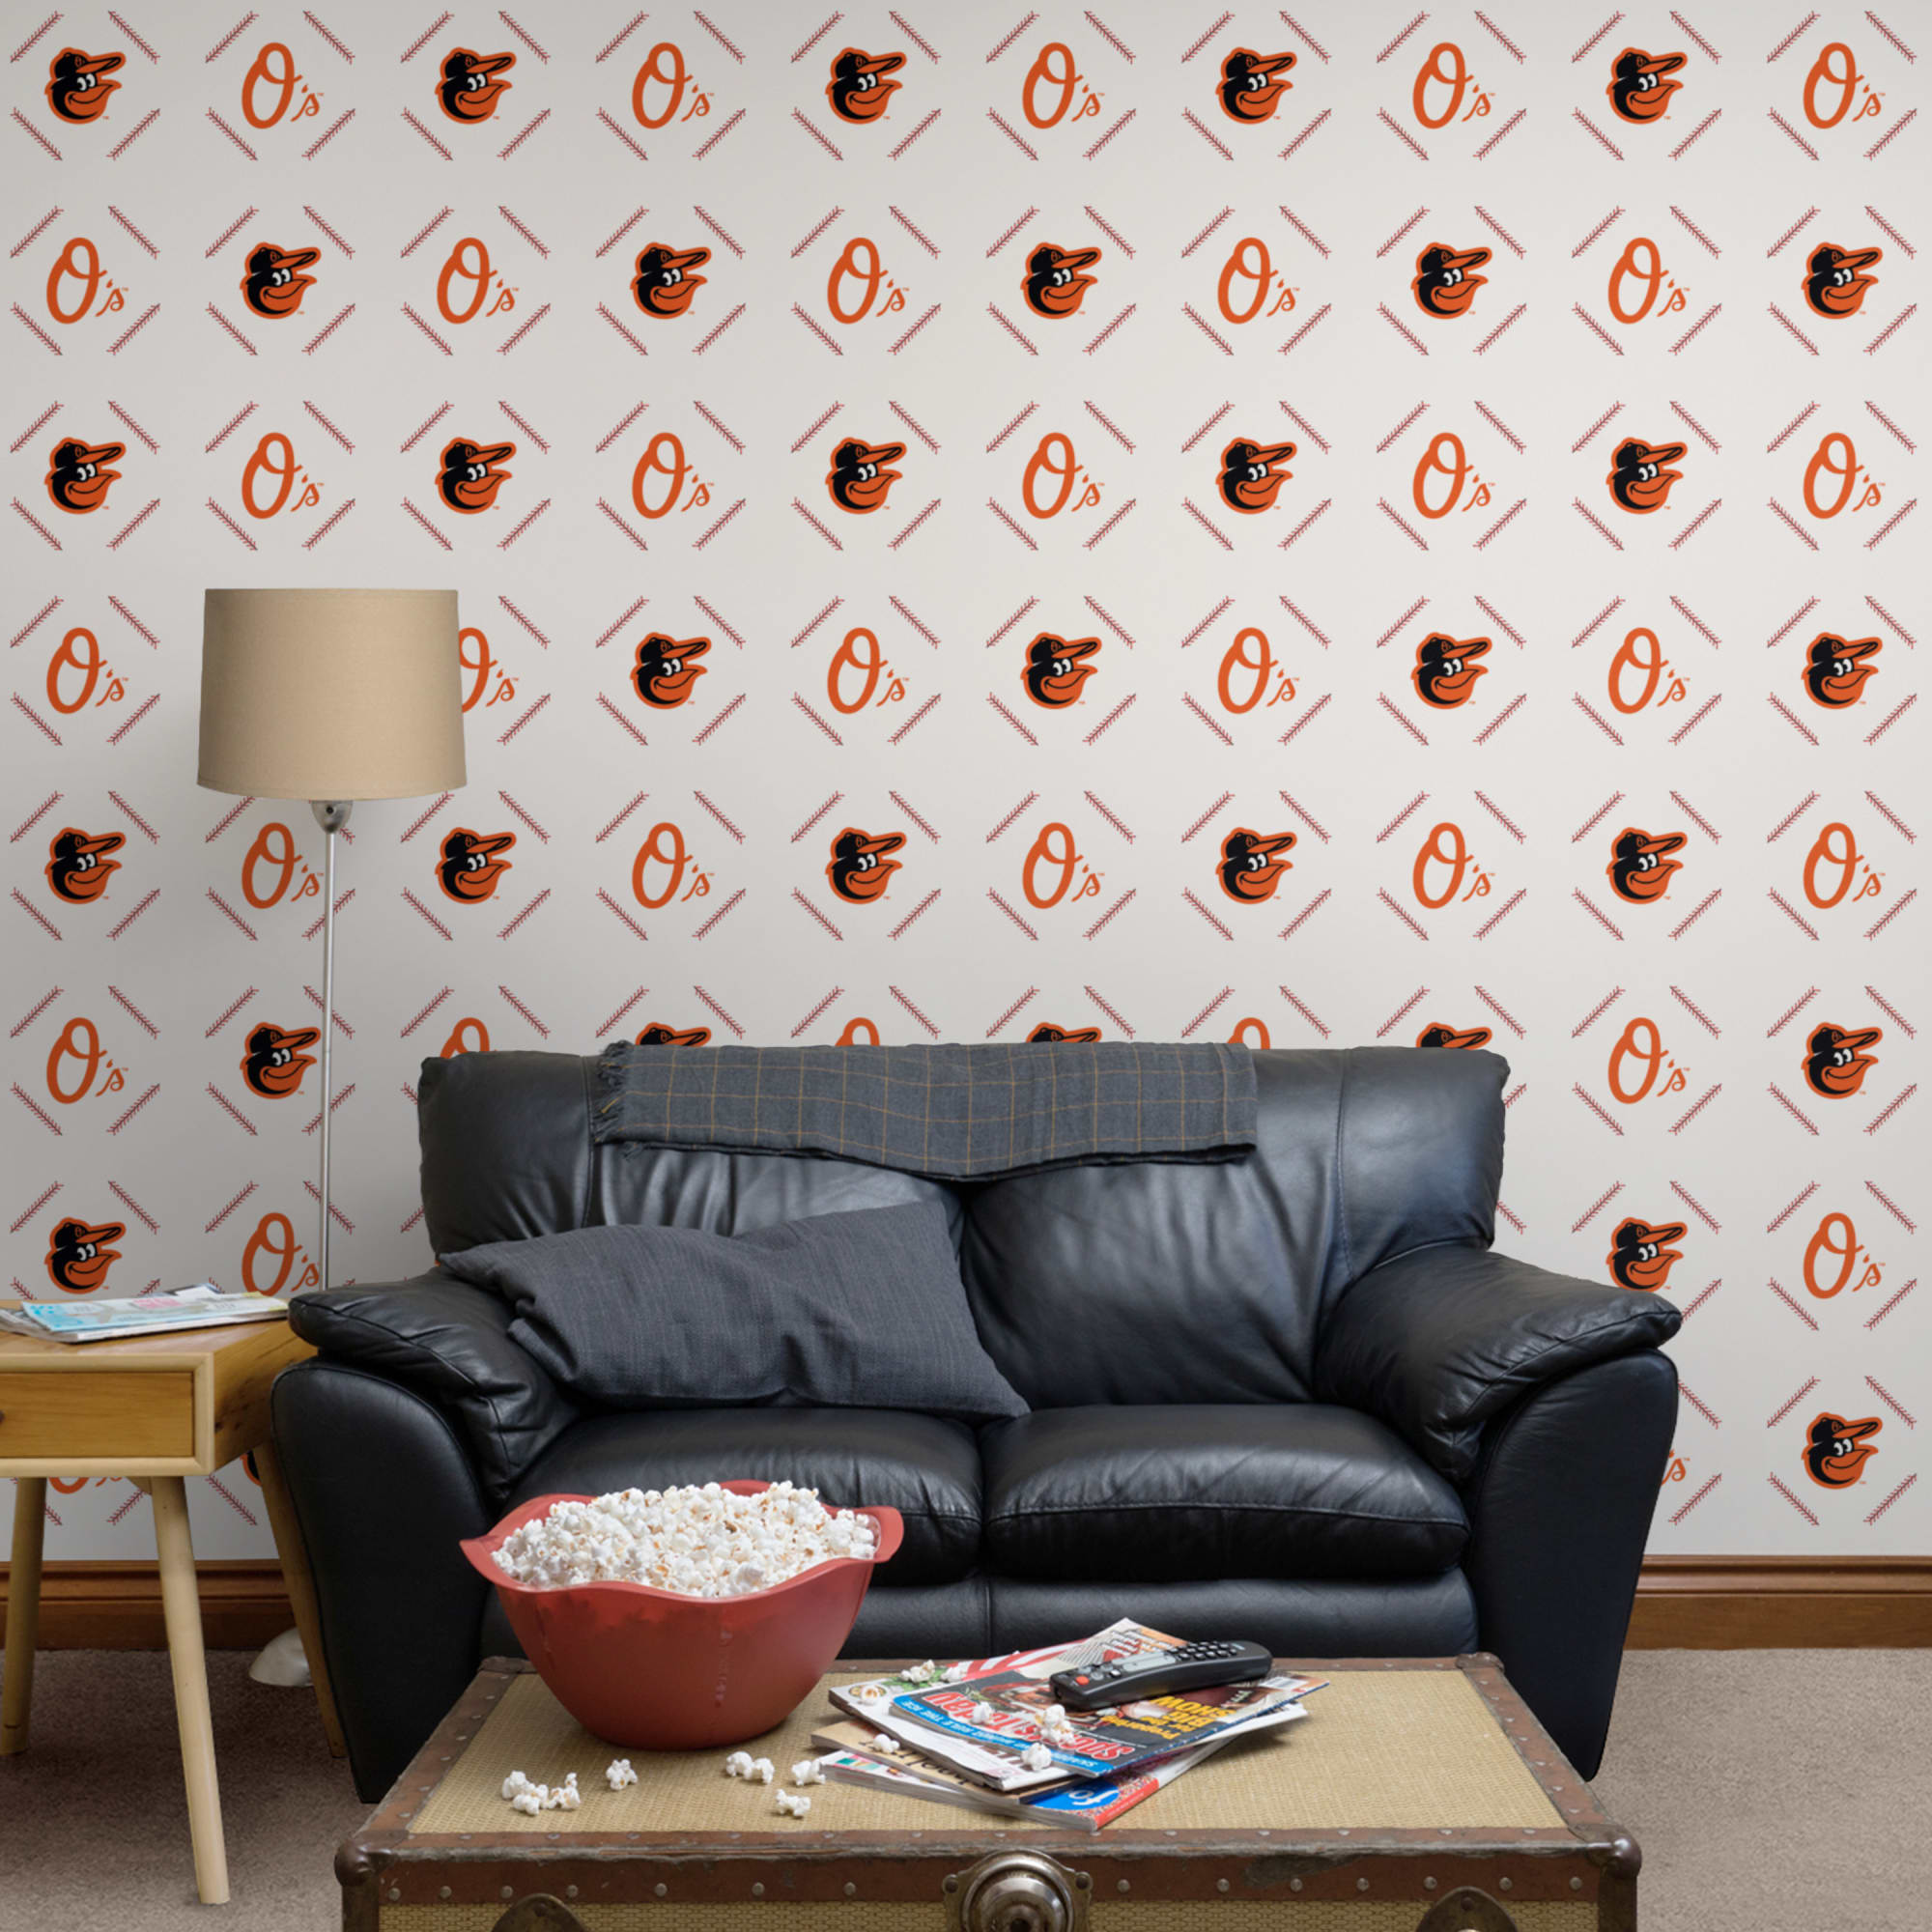 Baltimore Orioles: Stitch Pattern - Officially Licensed Removable Wallpaper 12" x 12" Sample by Fathead